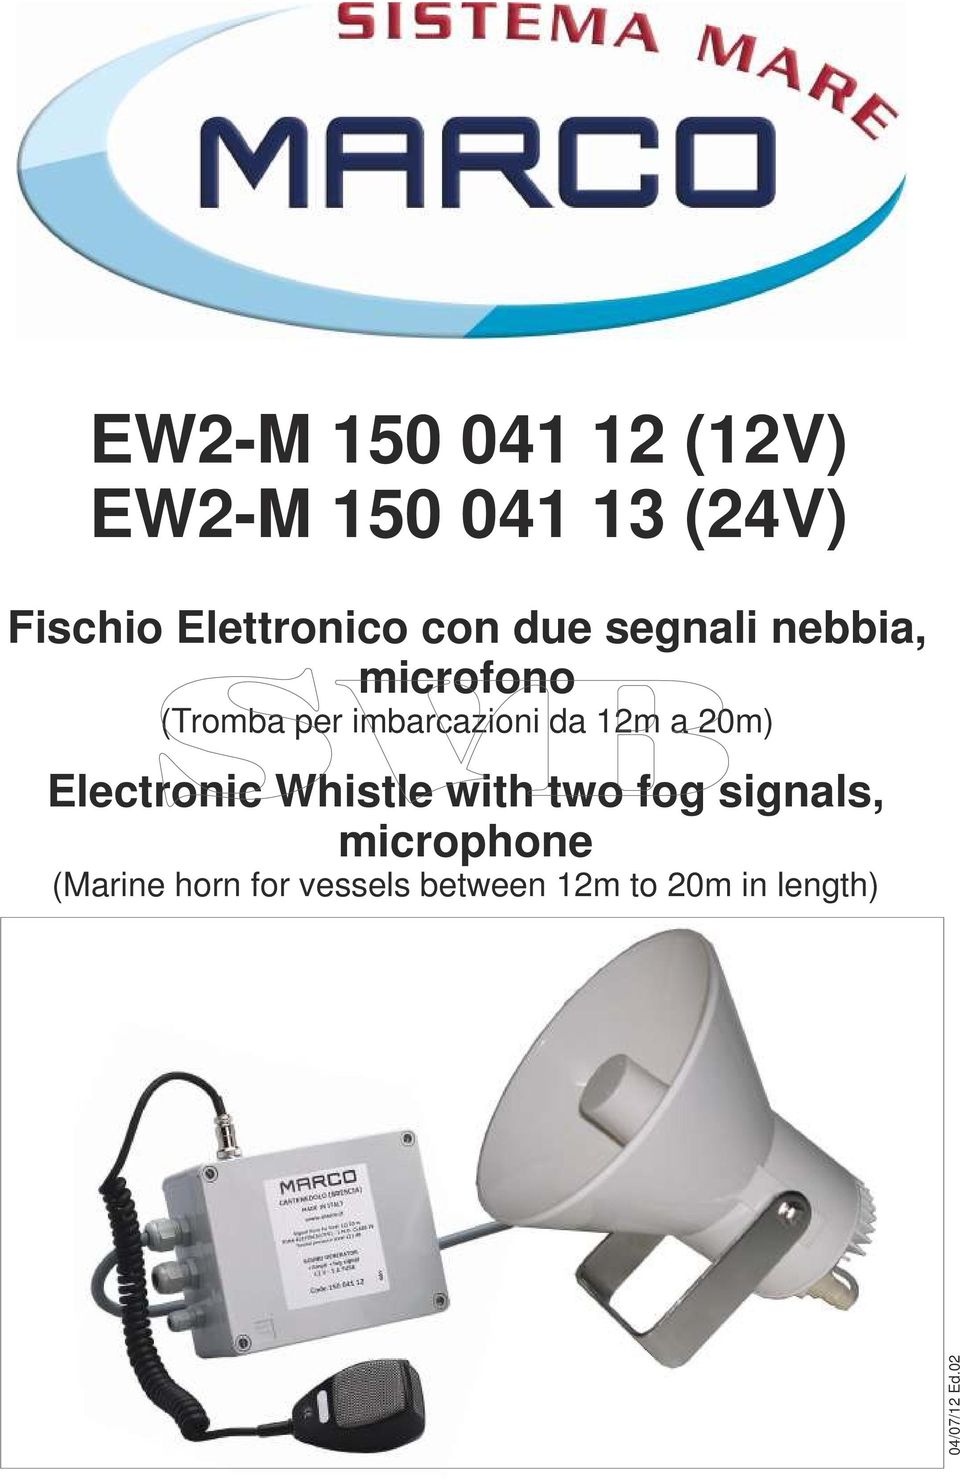 imbarcazioni da 12m a 20m) Electronic Whistle with two fog